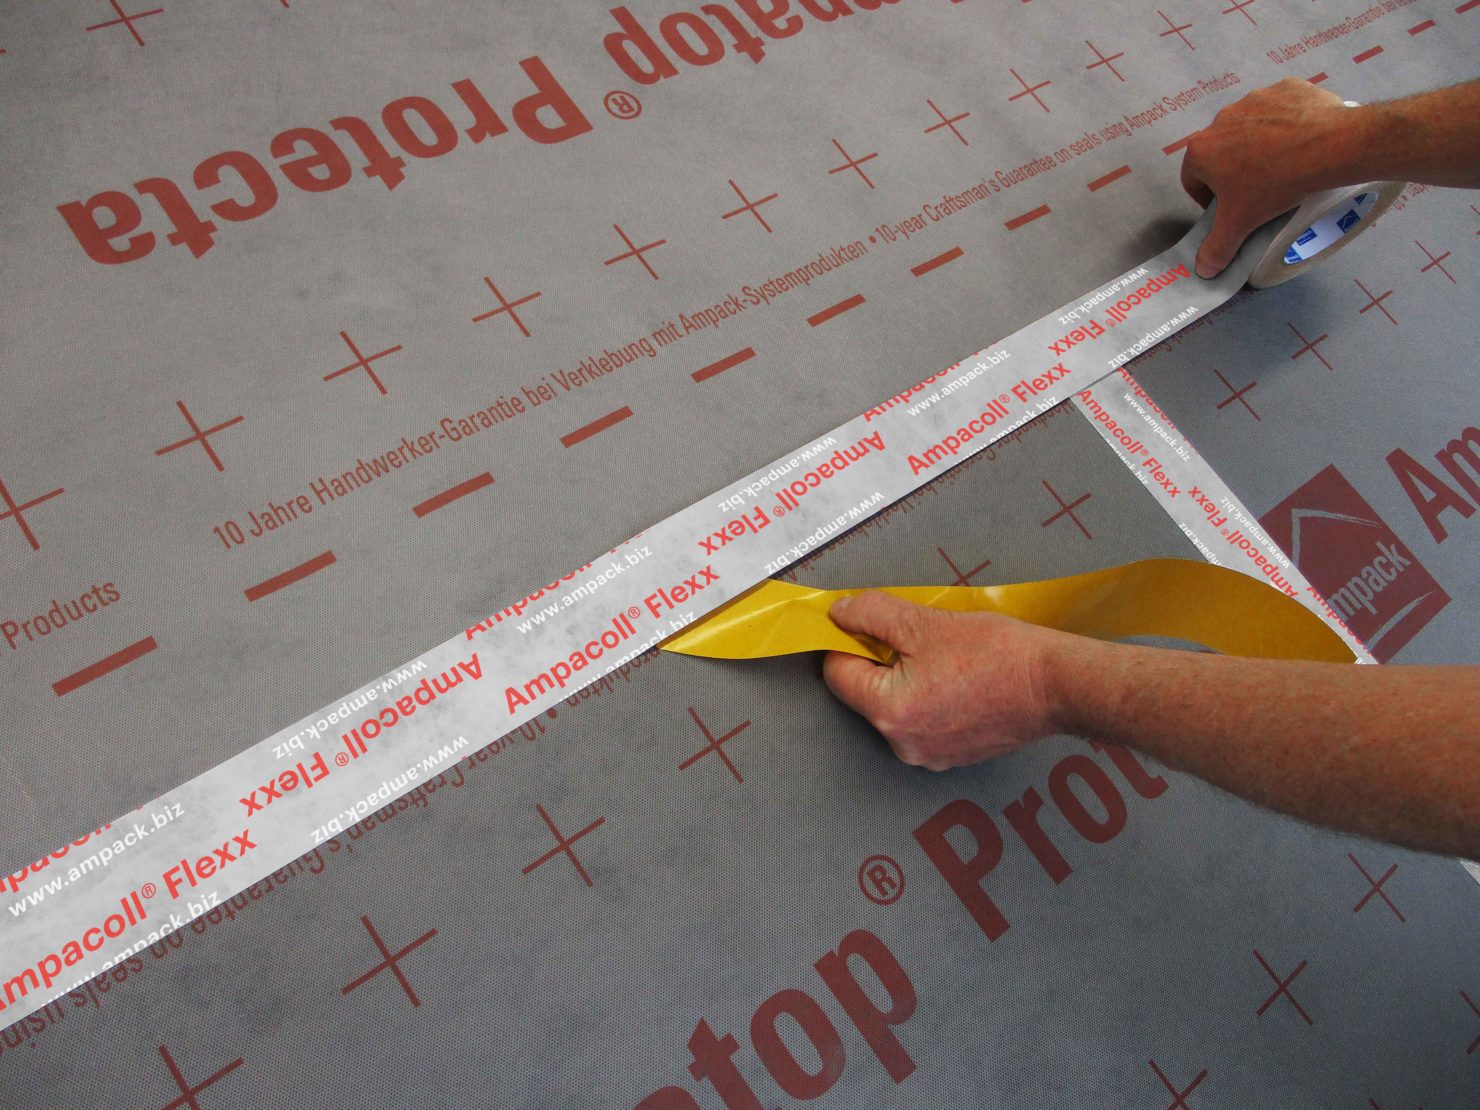 Material in action.

In this image you can see the Ampacoll Flexx tape being used for joining laps in one of the Ampatop breather membranes. The tape will stick tightly to fleecy membranes such as this and its soft, pliable nature means it is easy to work with on membranes laid directly on soft insulation.

Airtightness tapes are designed to be able to move and having wrinkles and creases in a membrane tends to very slowly separate the two layers. This is not the fault of the tape is it needs to be able to move with the building and is not designed to resist any tension between the two layers of membrane.

If you’re unsure of how to instal membranes or how to lap them effectively, please contact us.